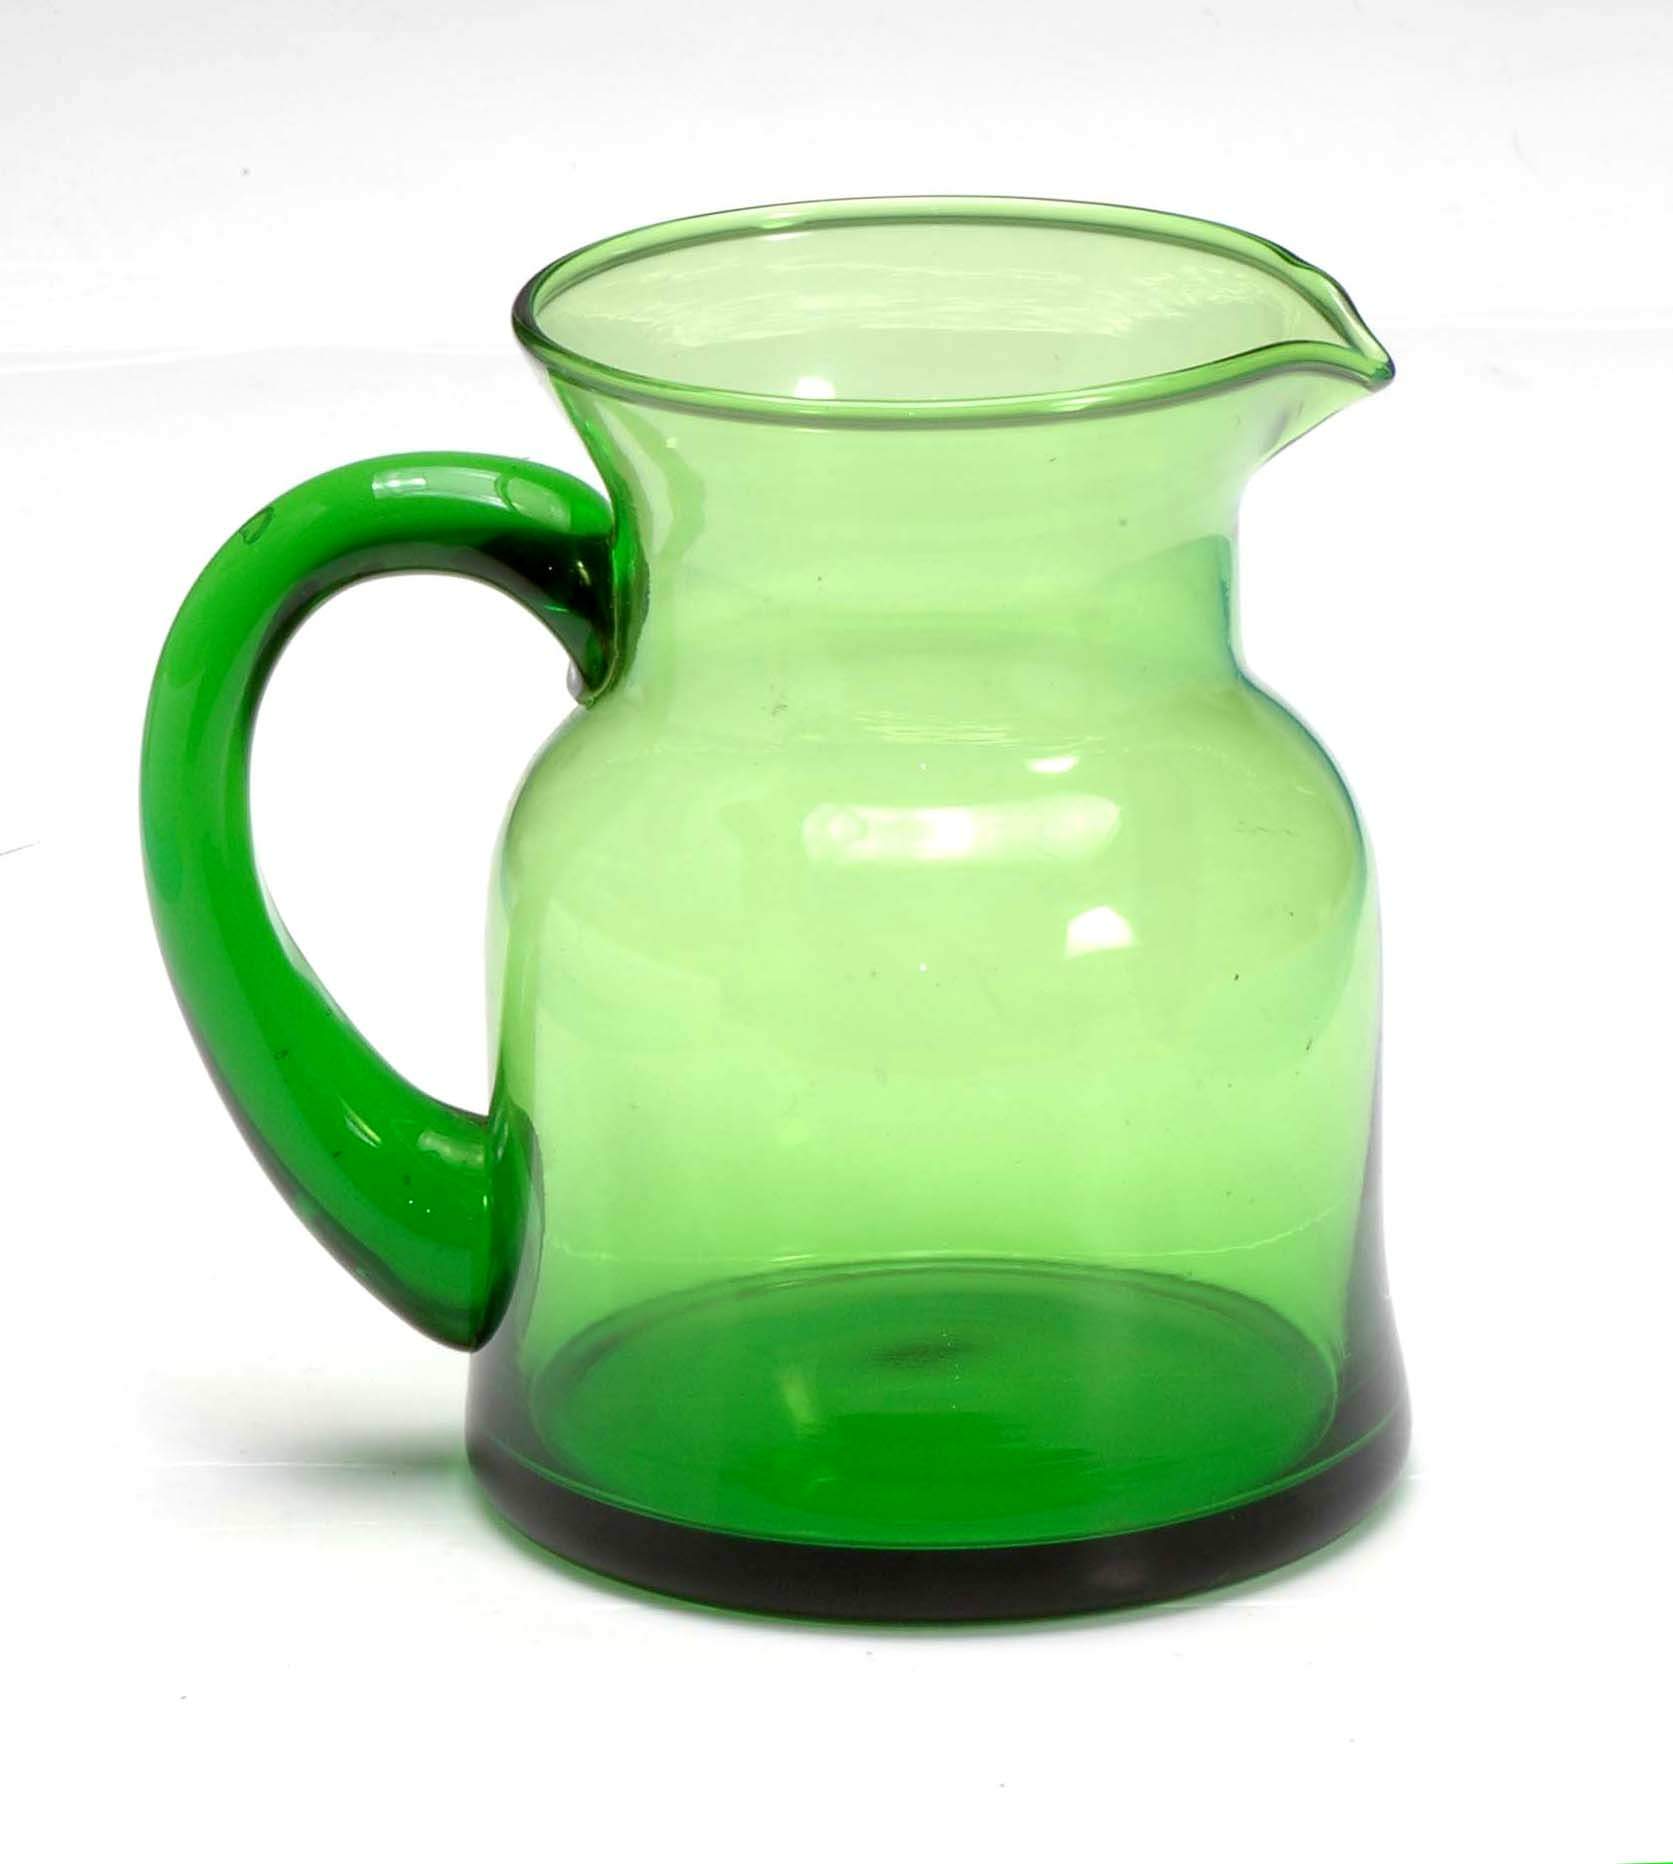 Pitchers and decanters 
  
   
     
    